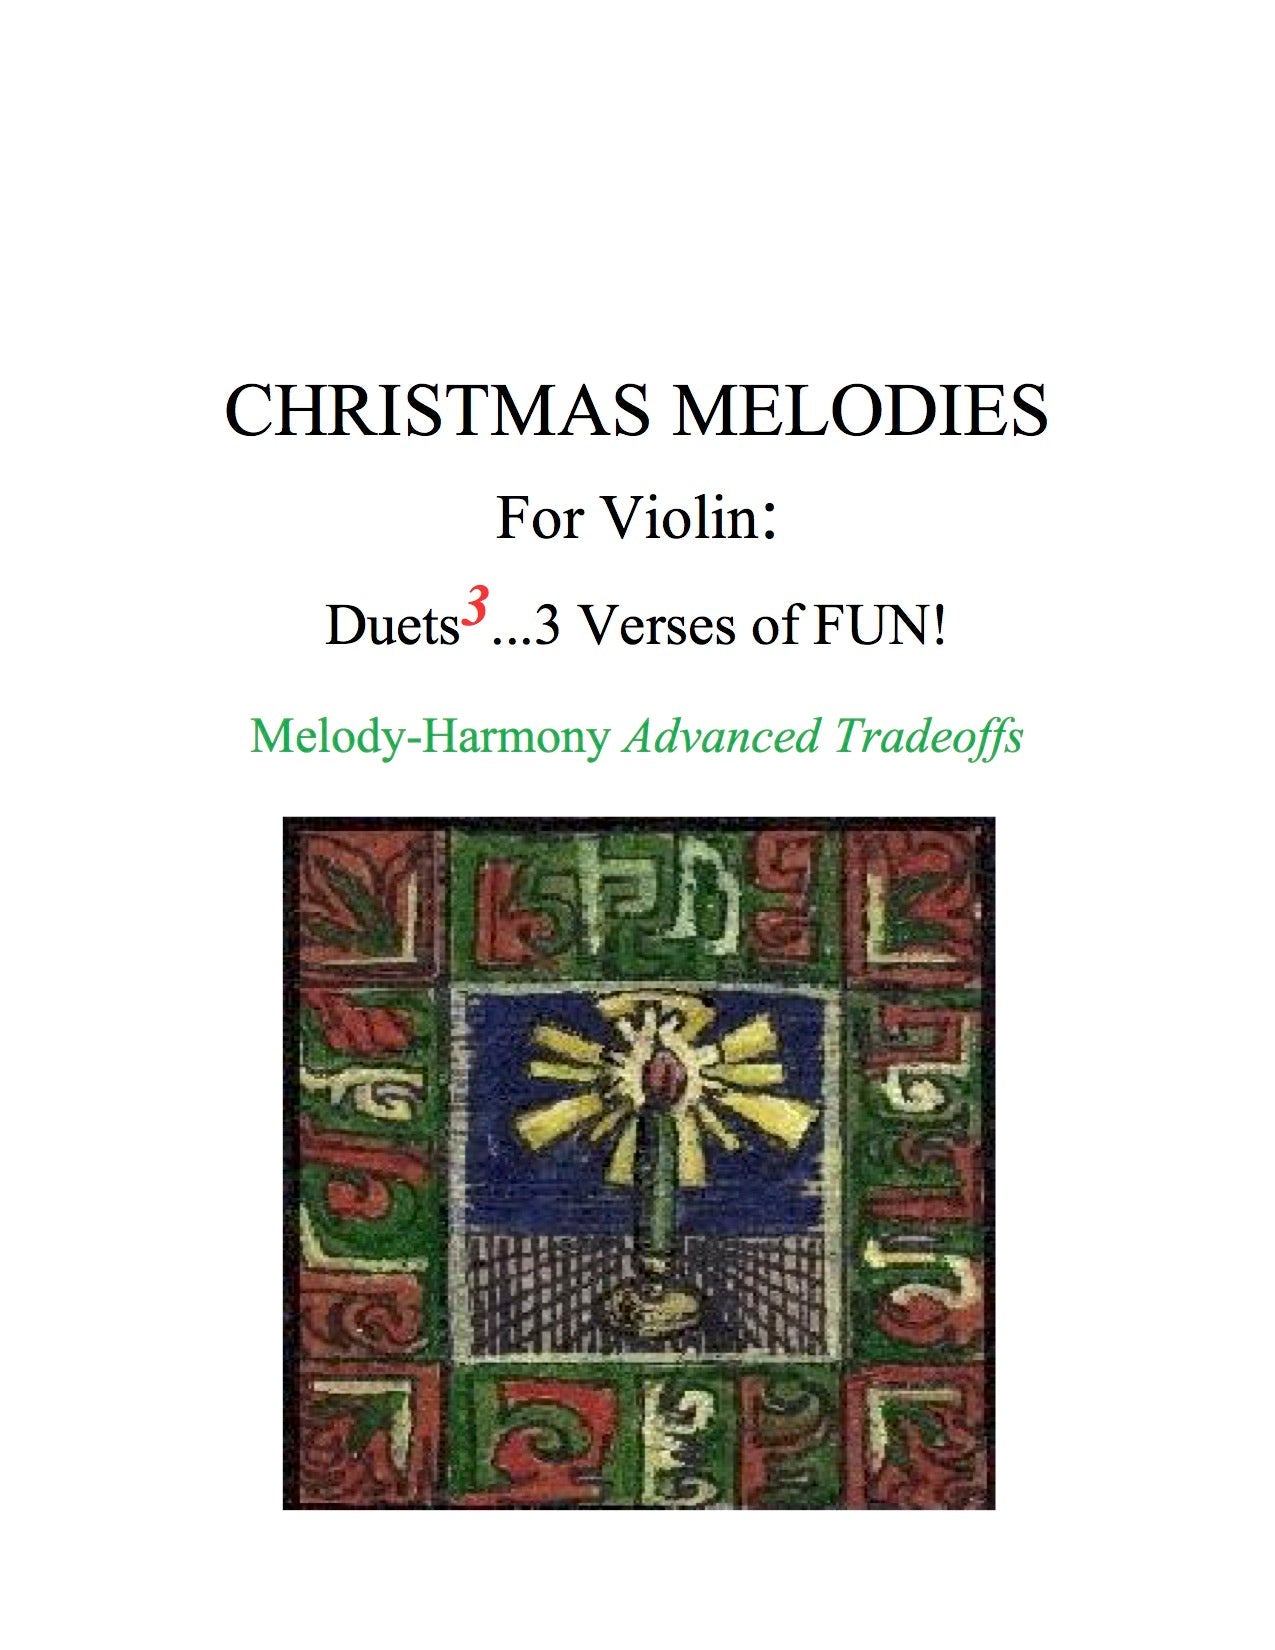 127 - Christmas Melodies For Viola: (B) Duets to the 3rd Power...3 Verses of FUN!  Melody-Harmony Tradeoff